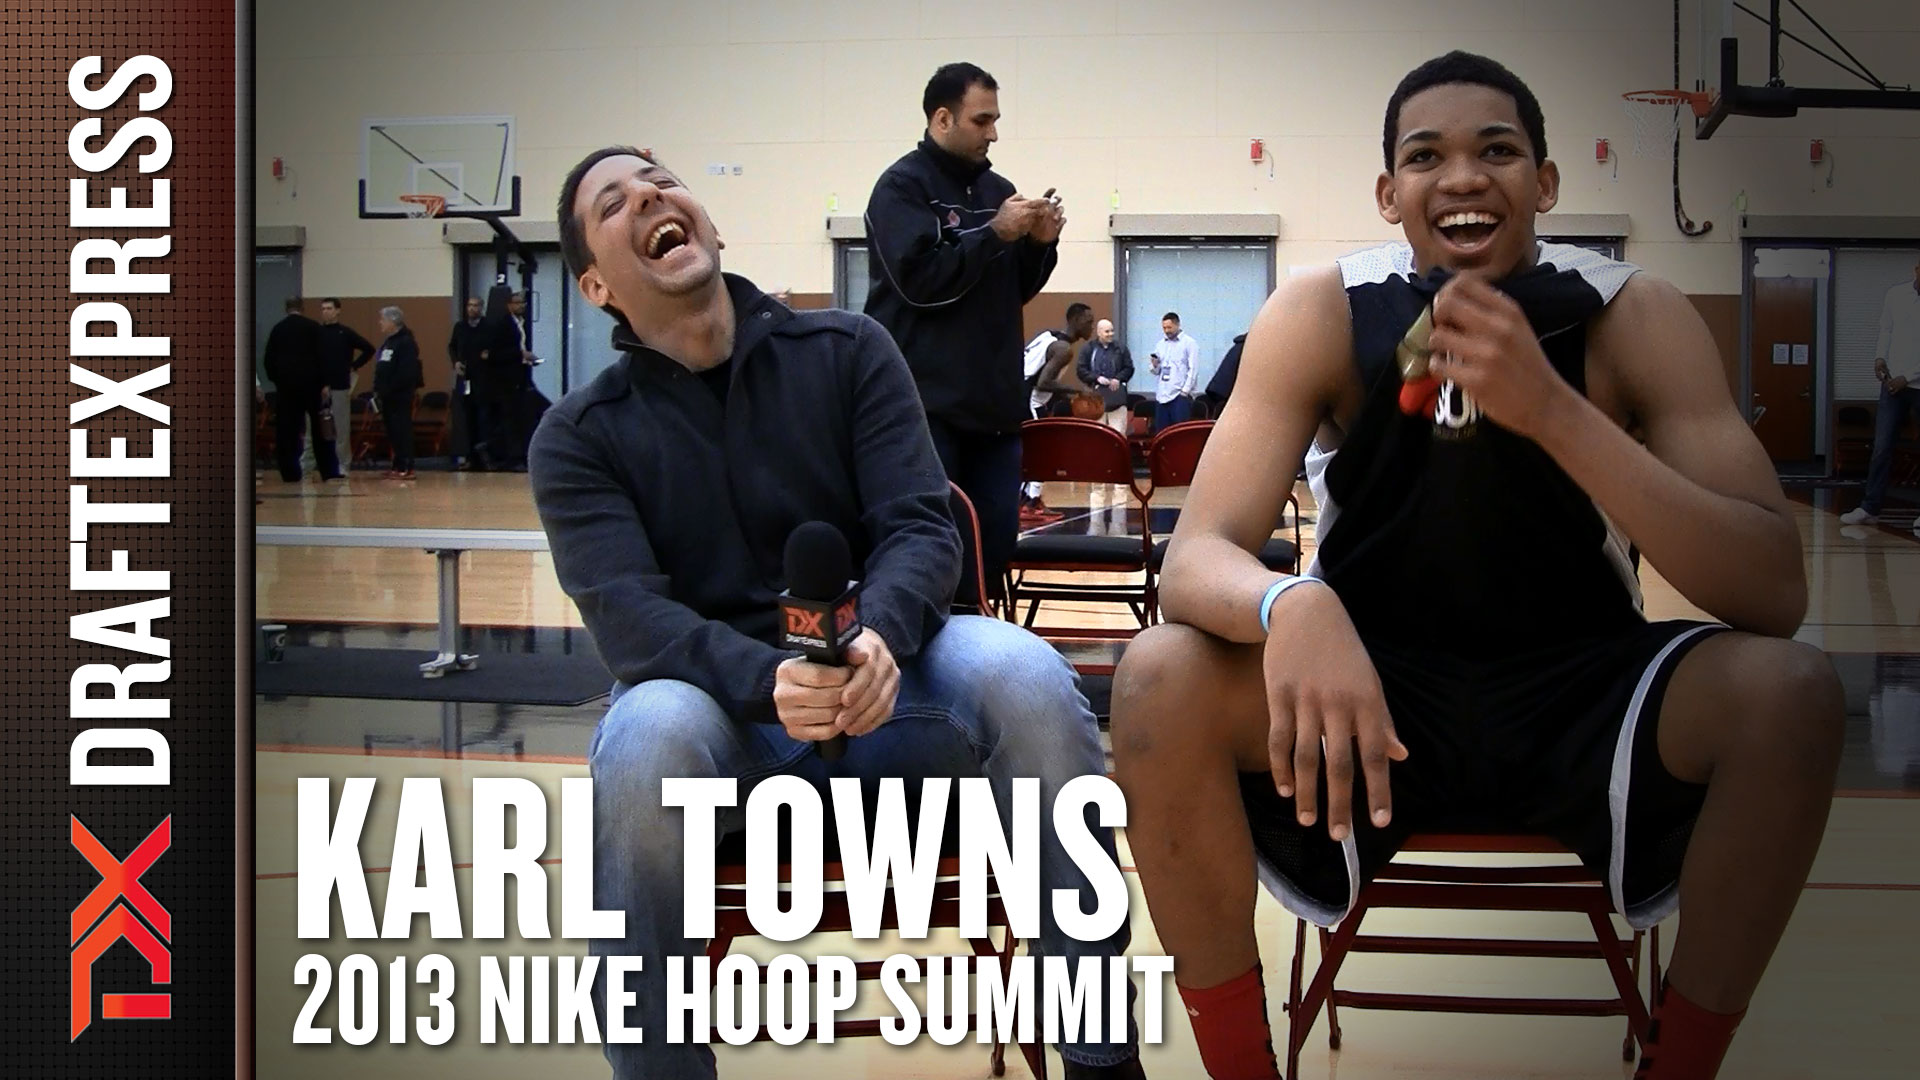 DX Vault: Karl Towns Interview from the 2013 Nike Hoop Summit